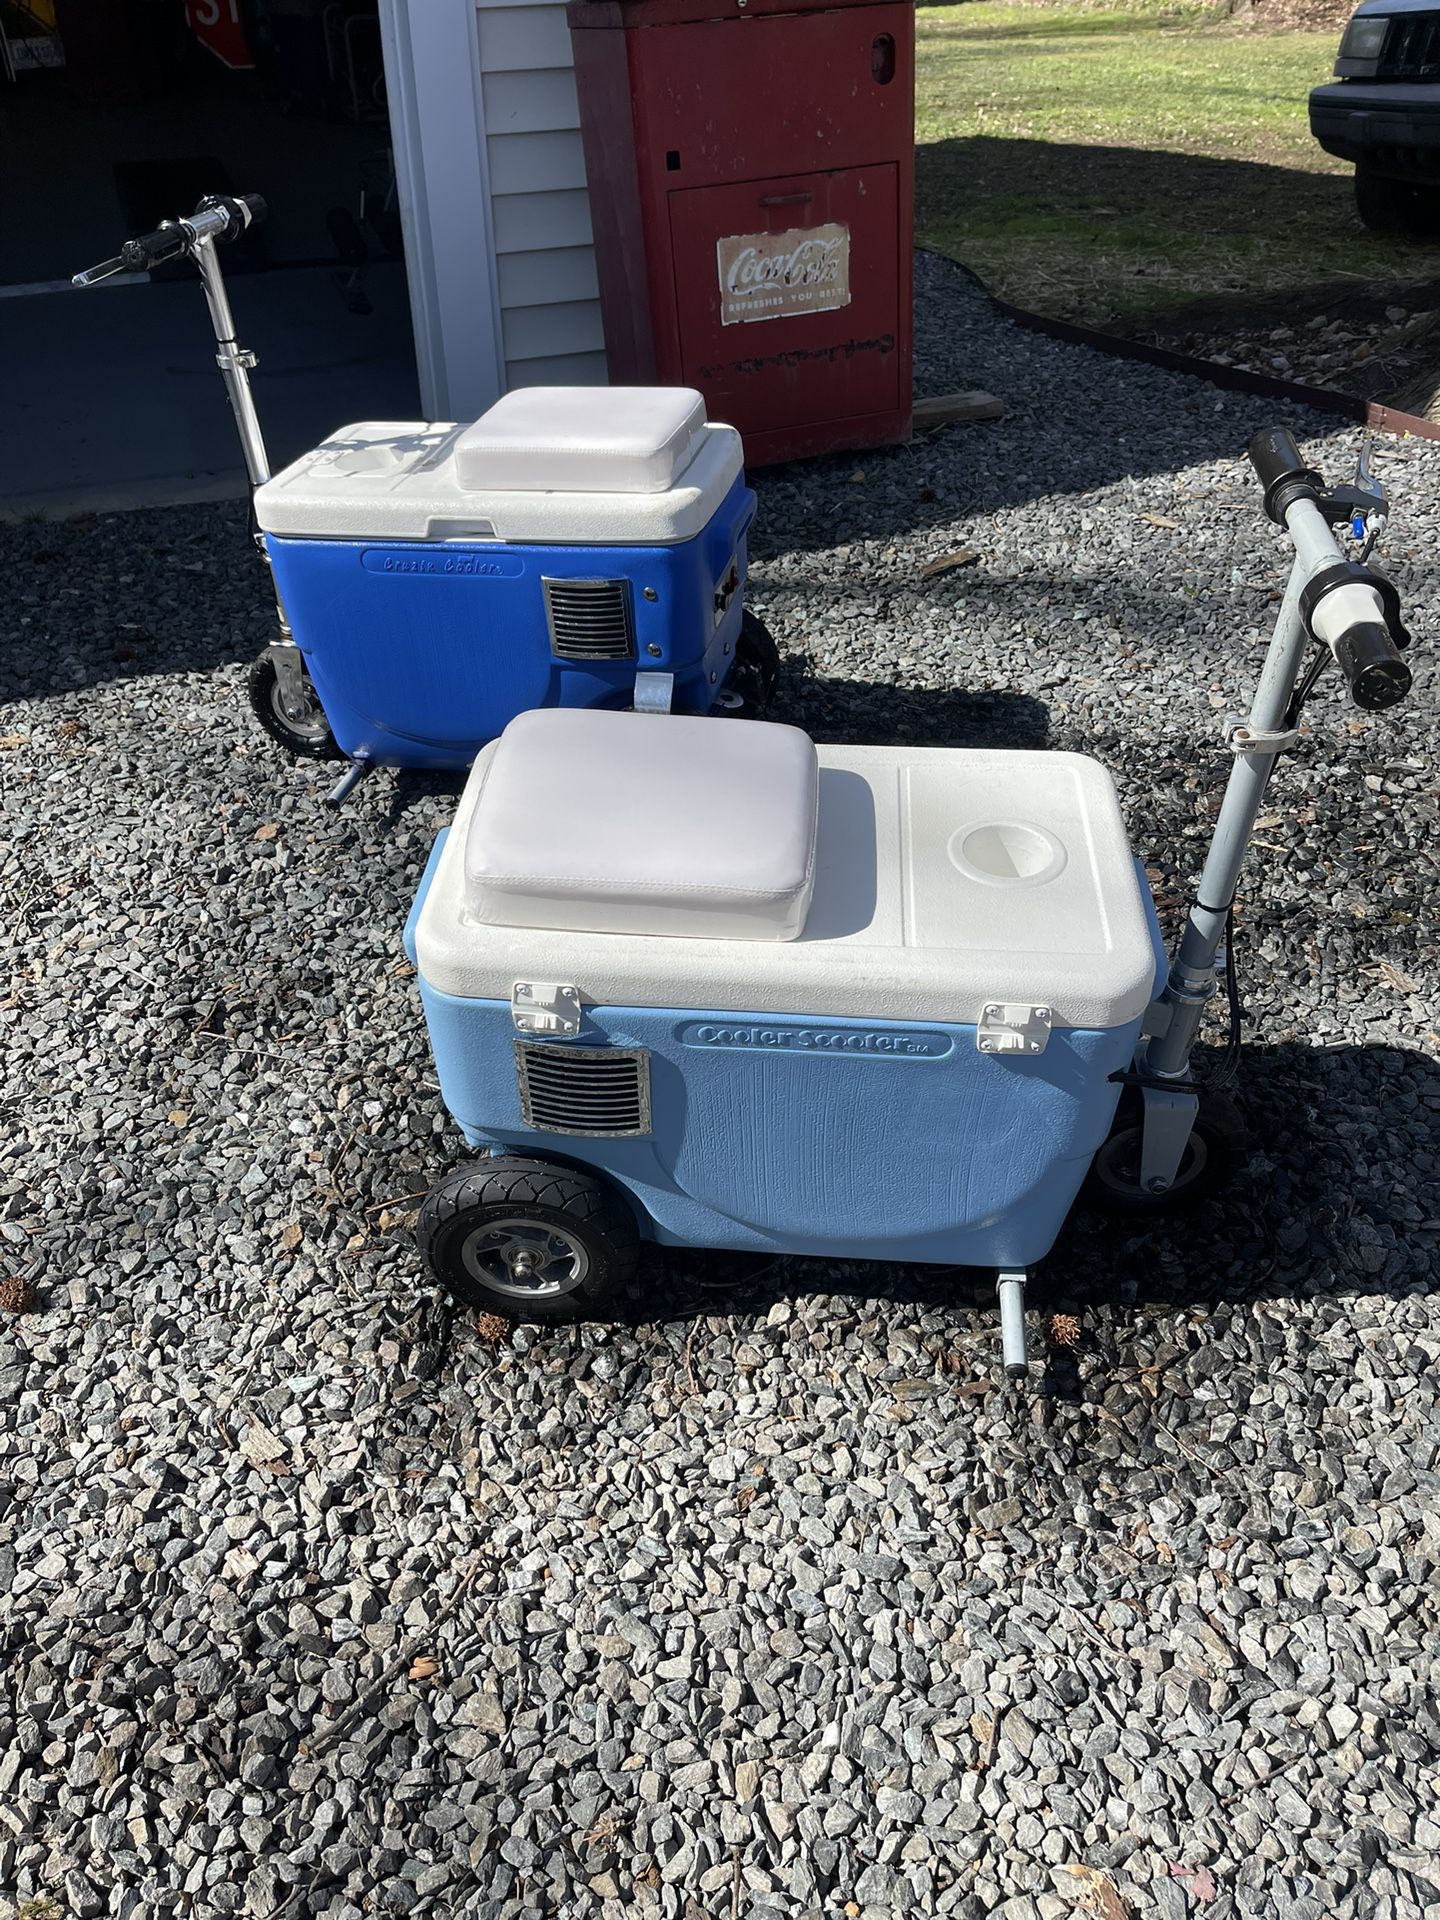 Cooler Scooters